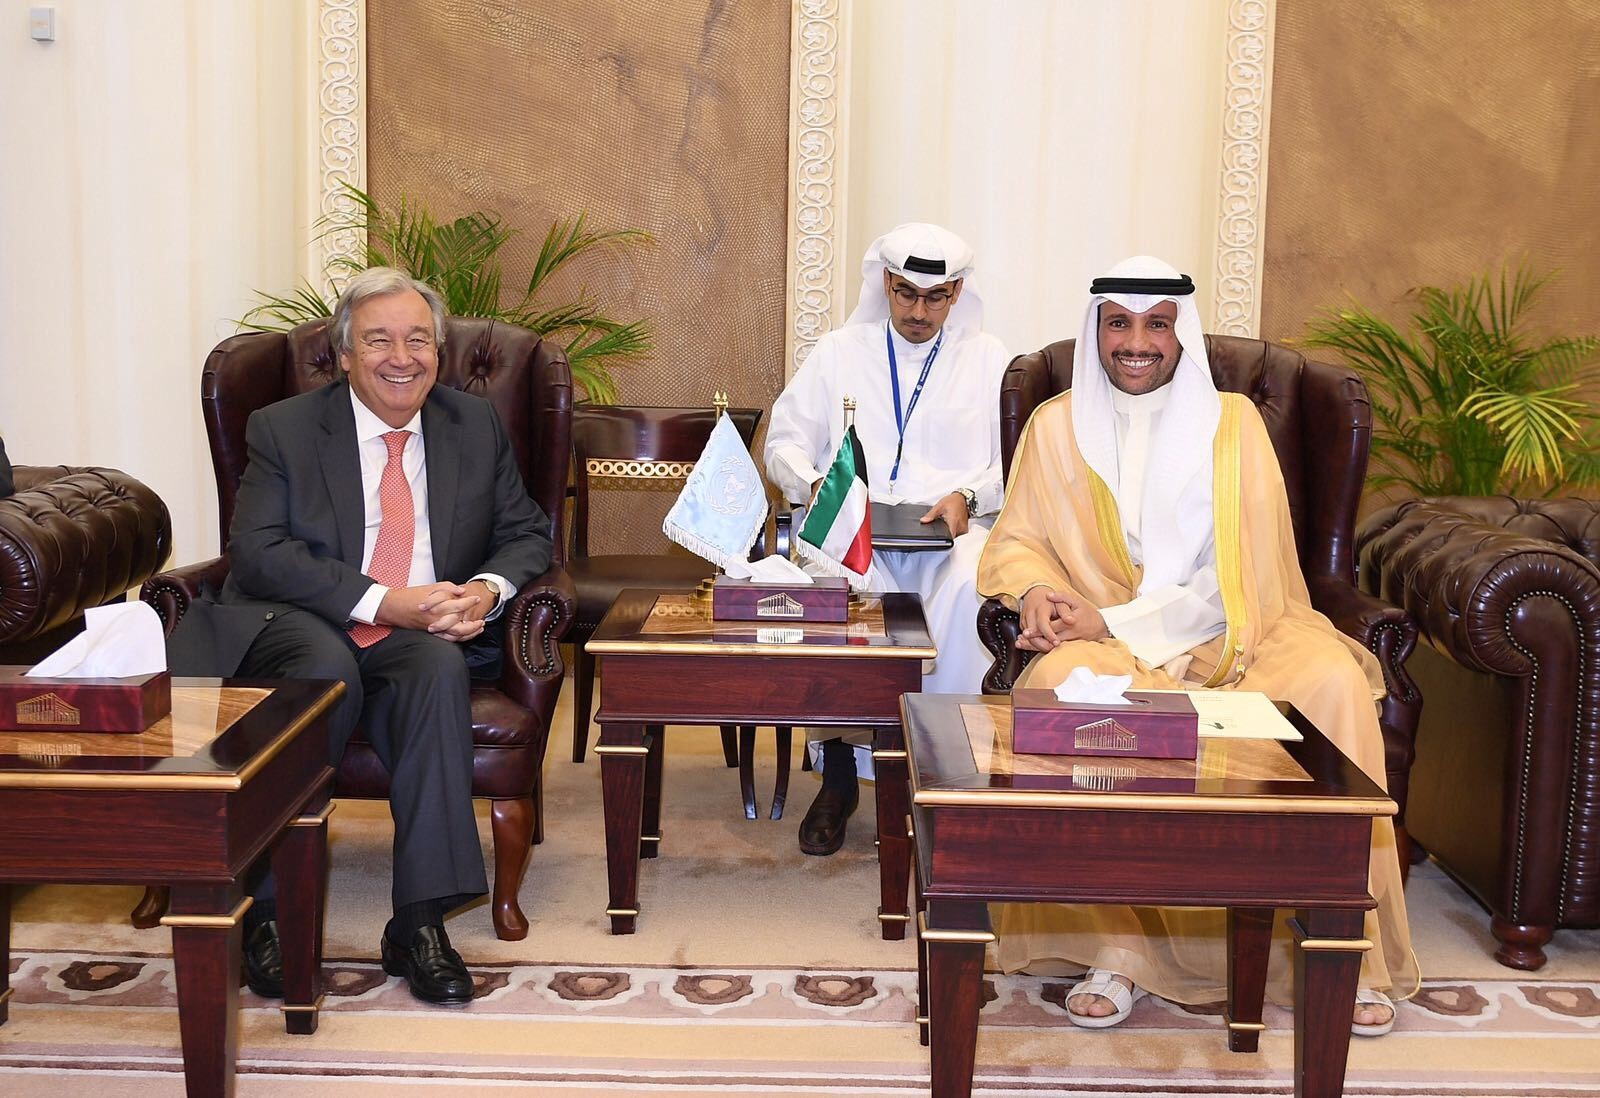 Kuwait's National Assembly Speaker Marzouq Al-Ghanim with visiting UN Secretary General Antonio Guterres